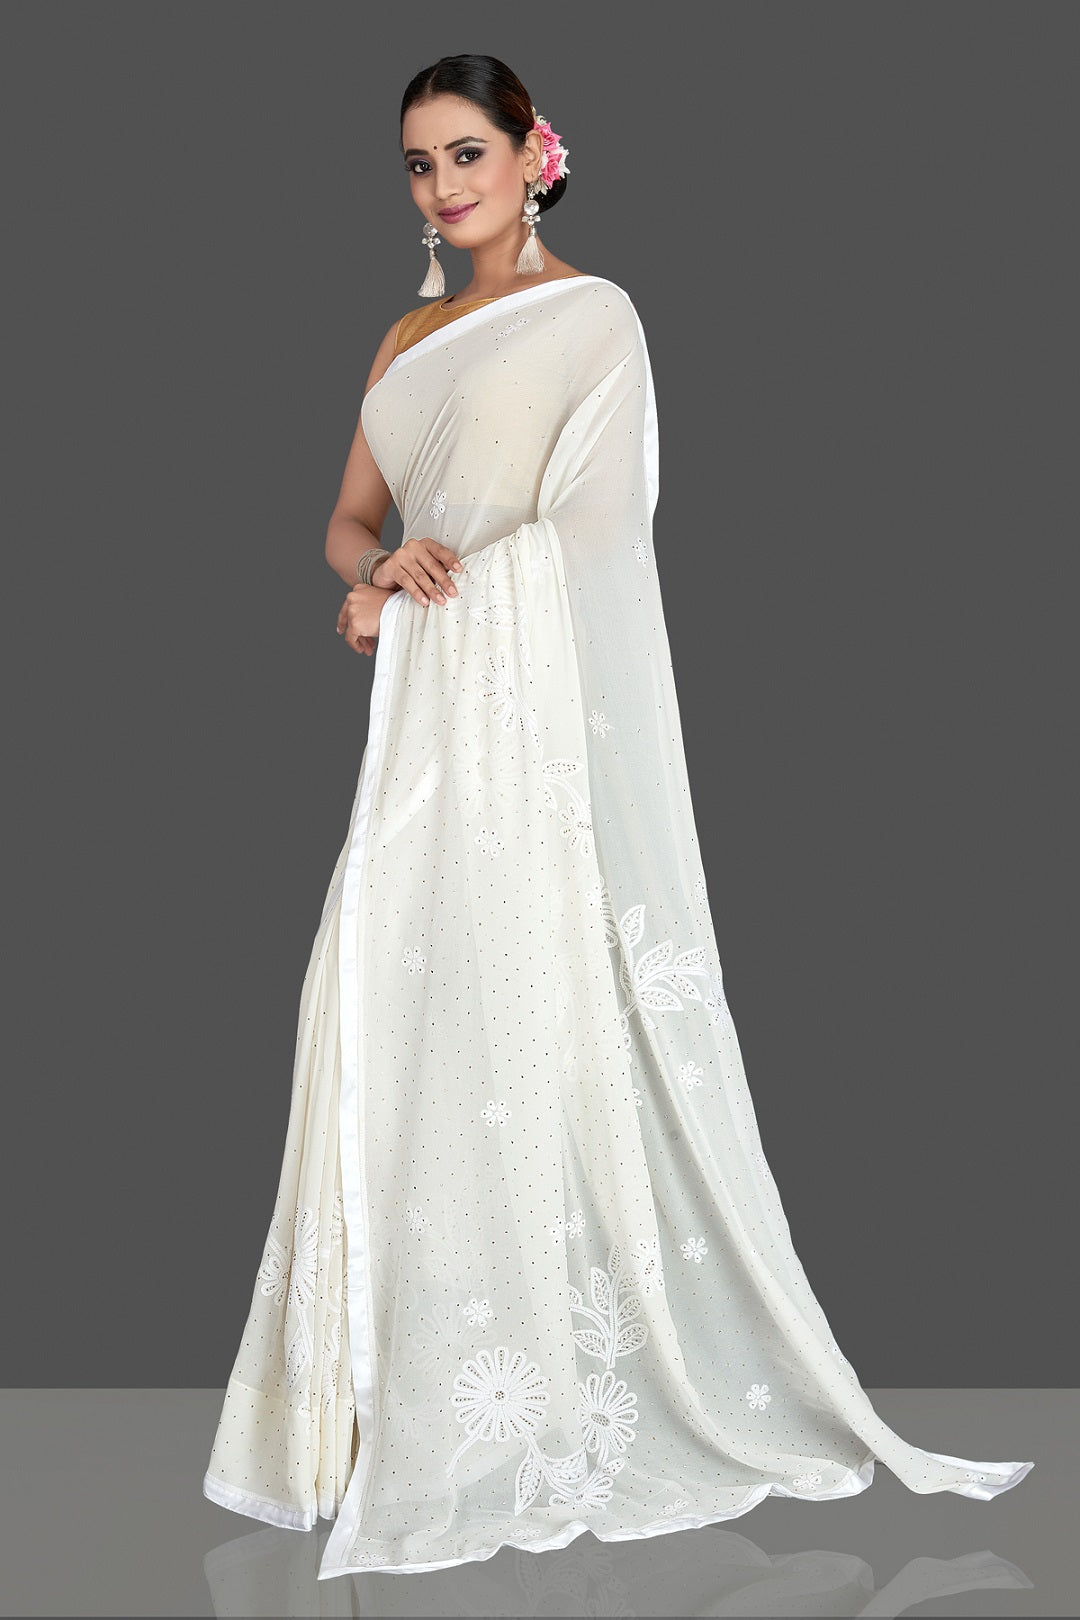 Shop elegant white Lucknowi chikankari work georgette saree online in USA. Flaunt your sartorial choice with beautiful embroidered saris, handwoven sarees, georgette sarees, pure silk sarees from Pure Elegance Indian saree store in USA.-side